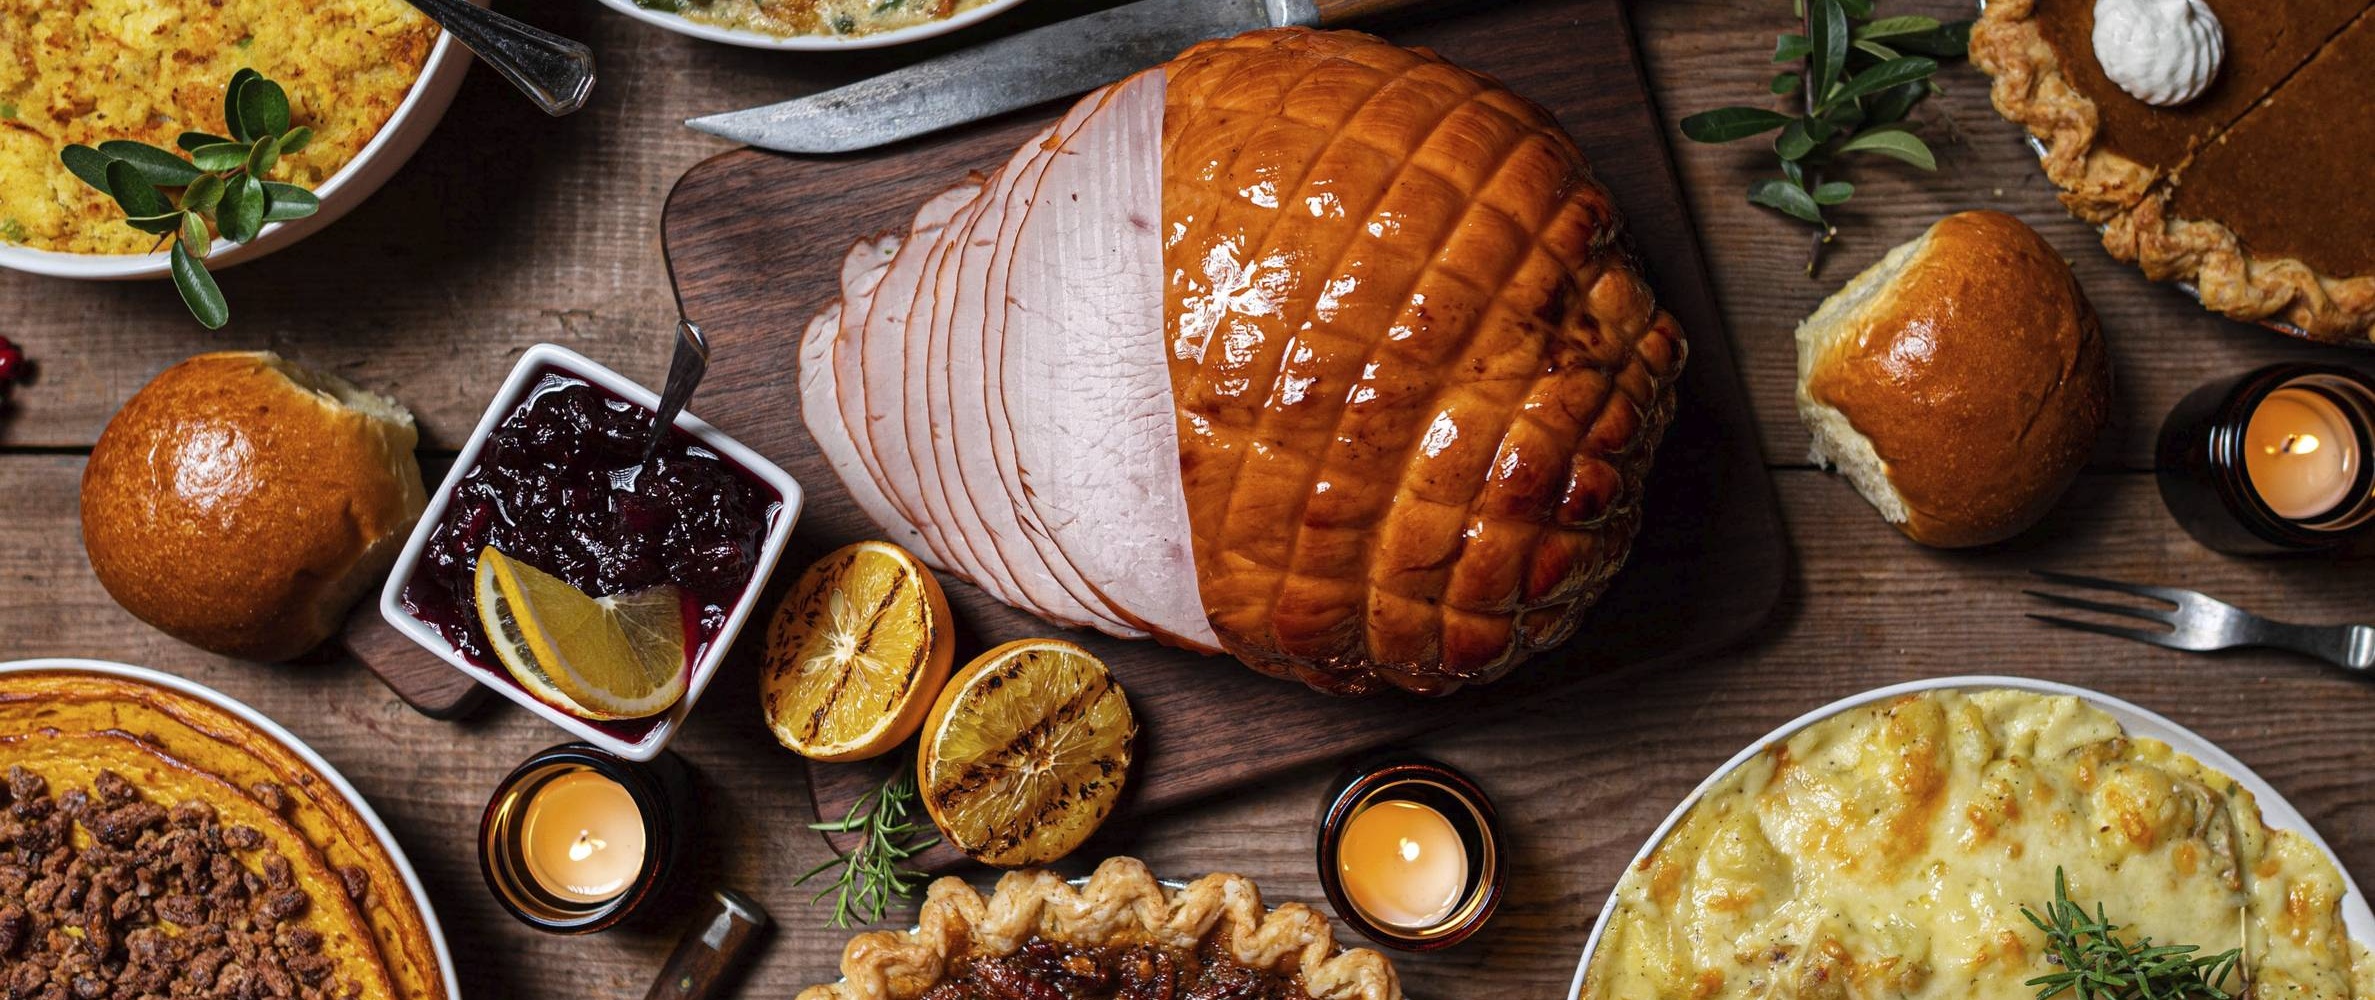 Best Restaurants For Thanksgiving Take Out In San Fran 2021